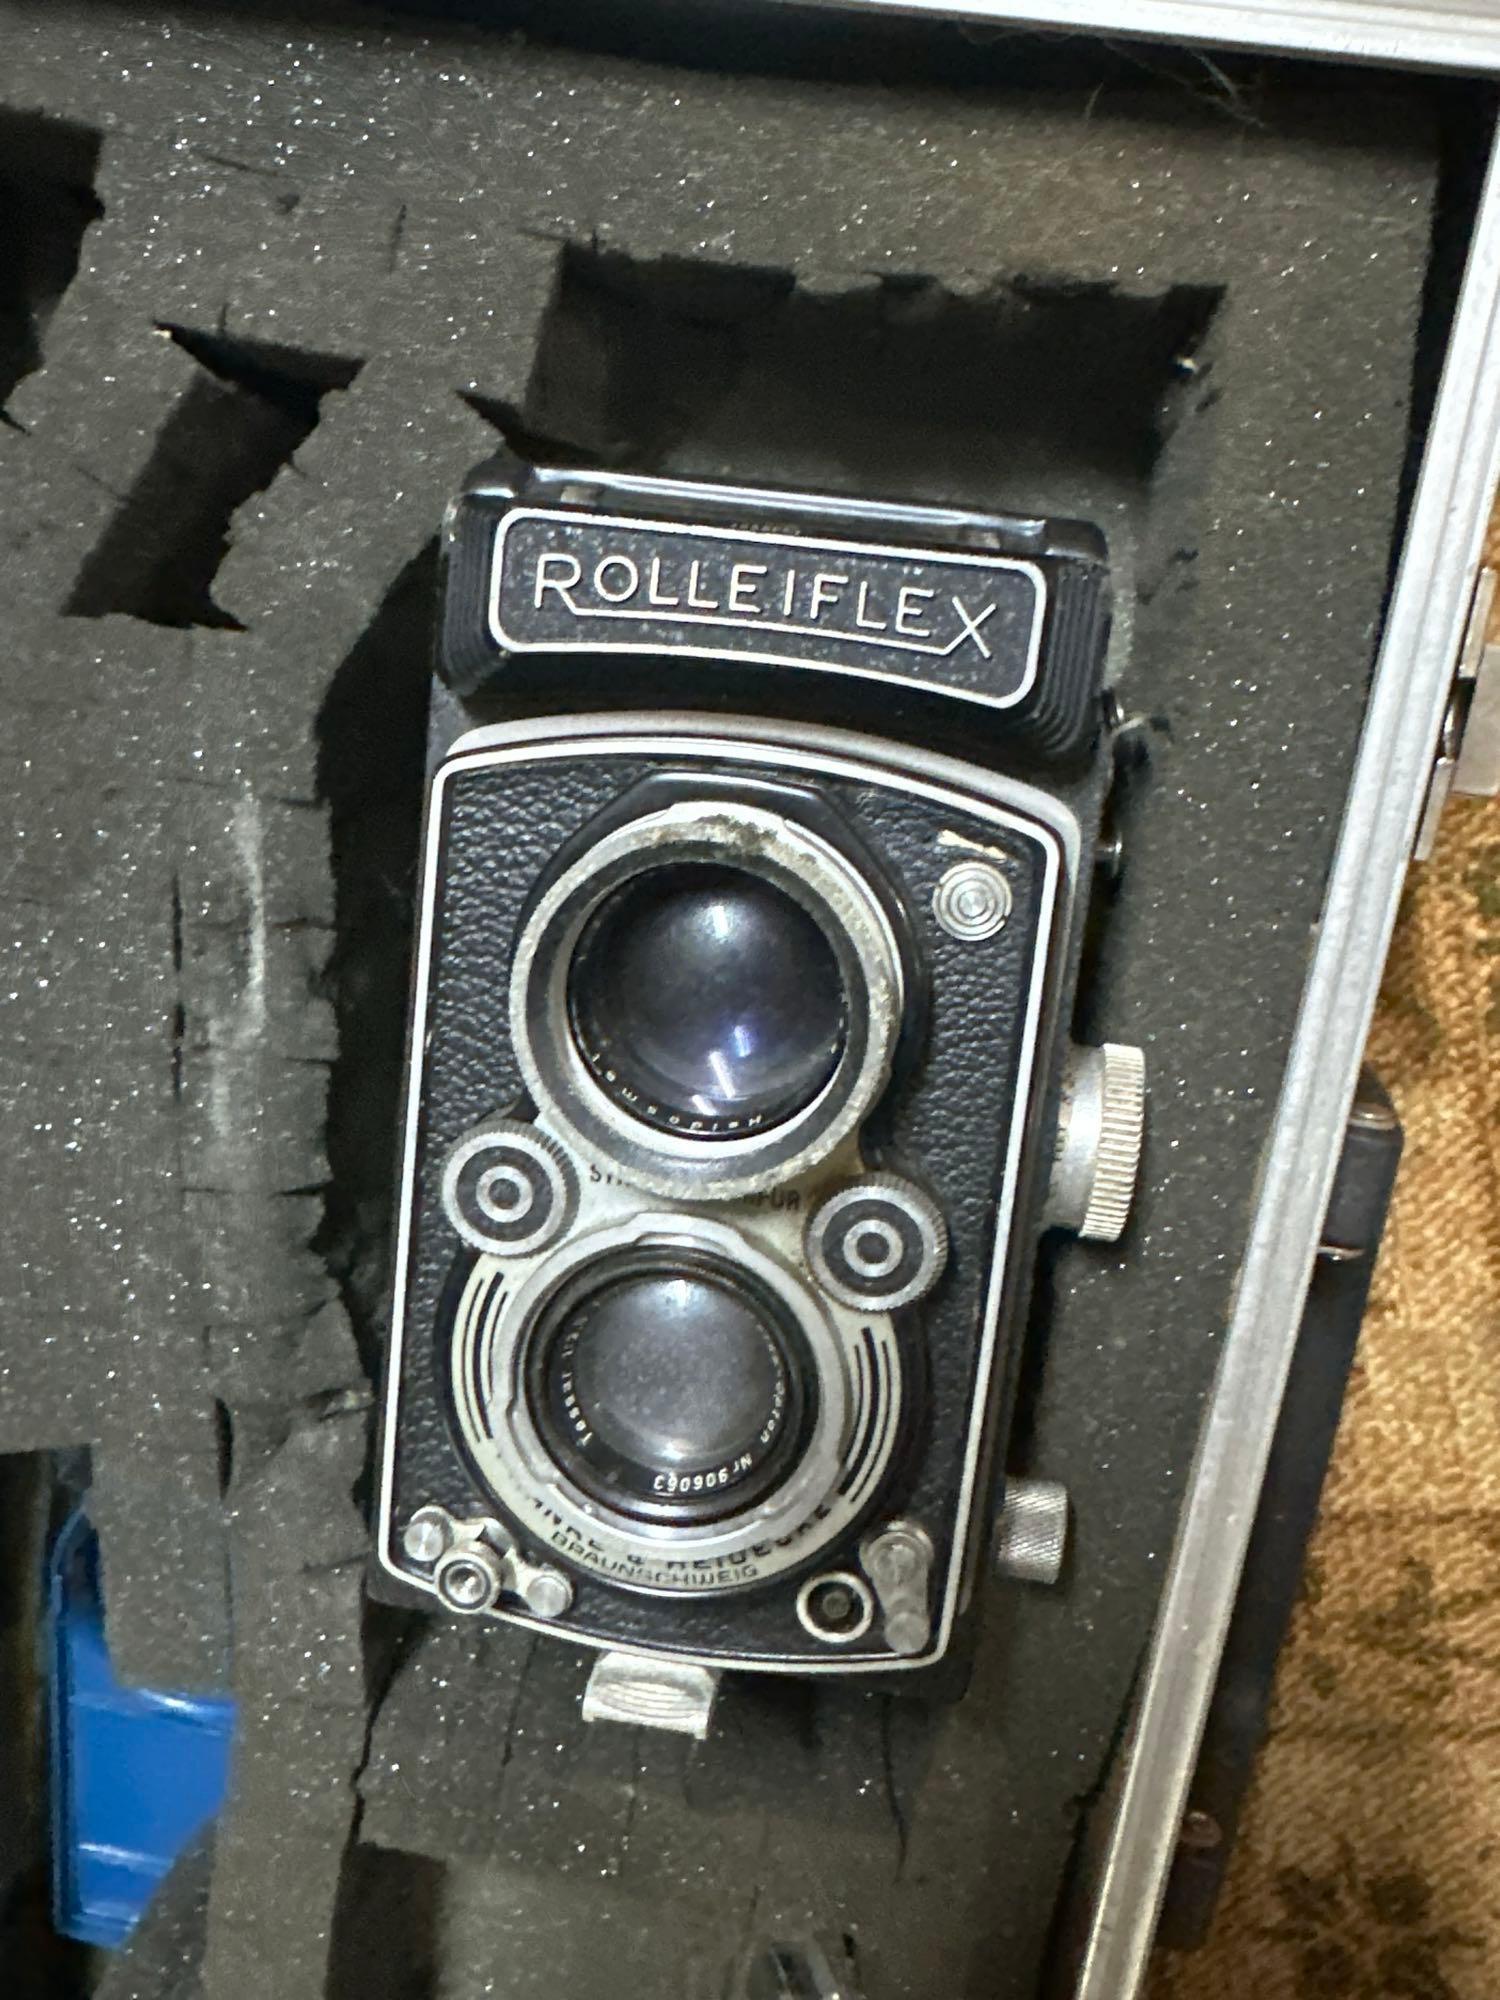 large lot of 35mm cameras and equipment - Roloflex camera - etc